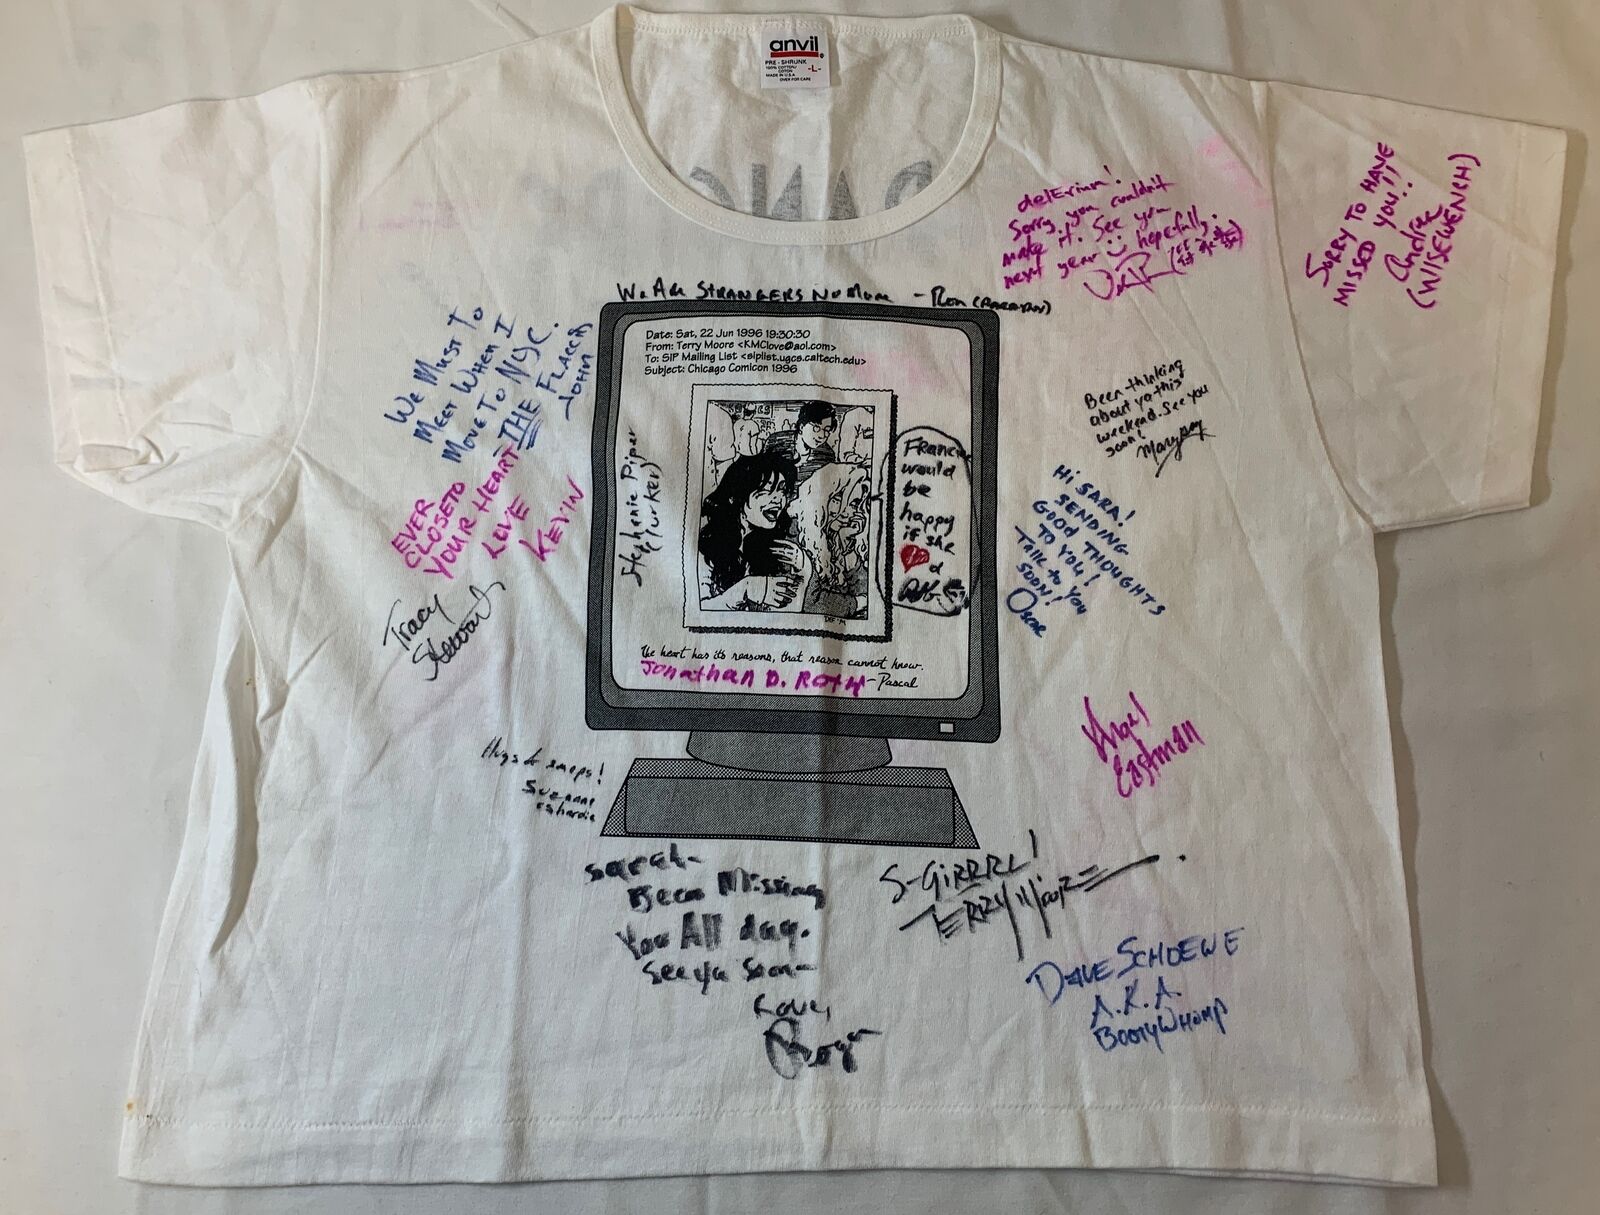 1996 STRANGERS IN PARADISE Chicago Comicon t-shirt ~ MUTIPLE SIGNATURES ~ size L